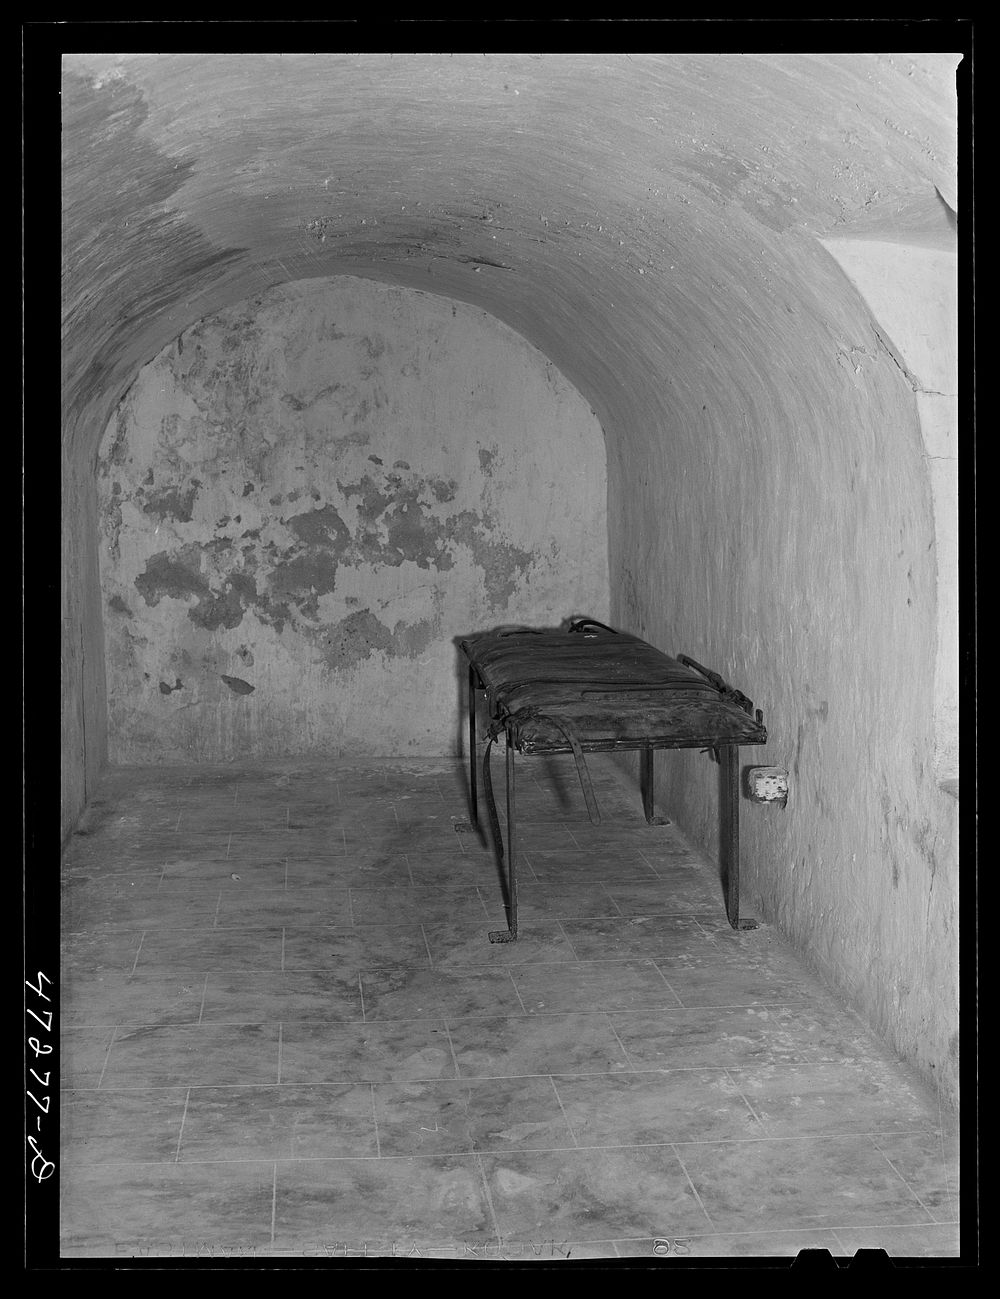 Charlotte Amalie, Saint Thomas Island, Virgin Islands. The solitary confinement dungeon in the old fort. Sourced from the…